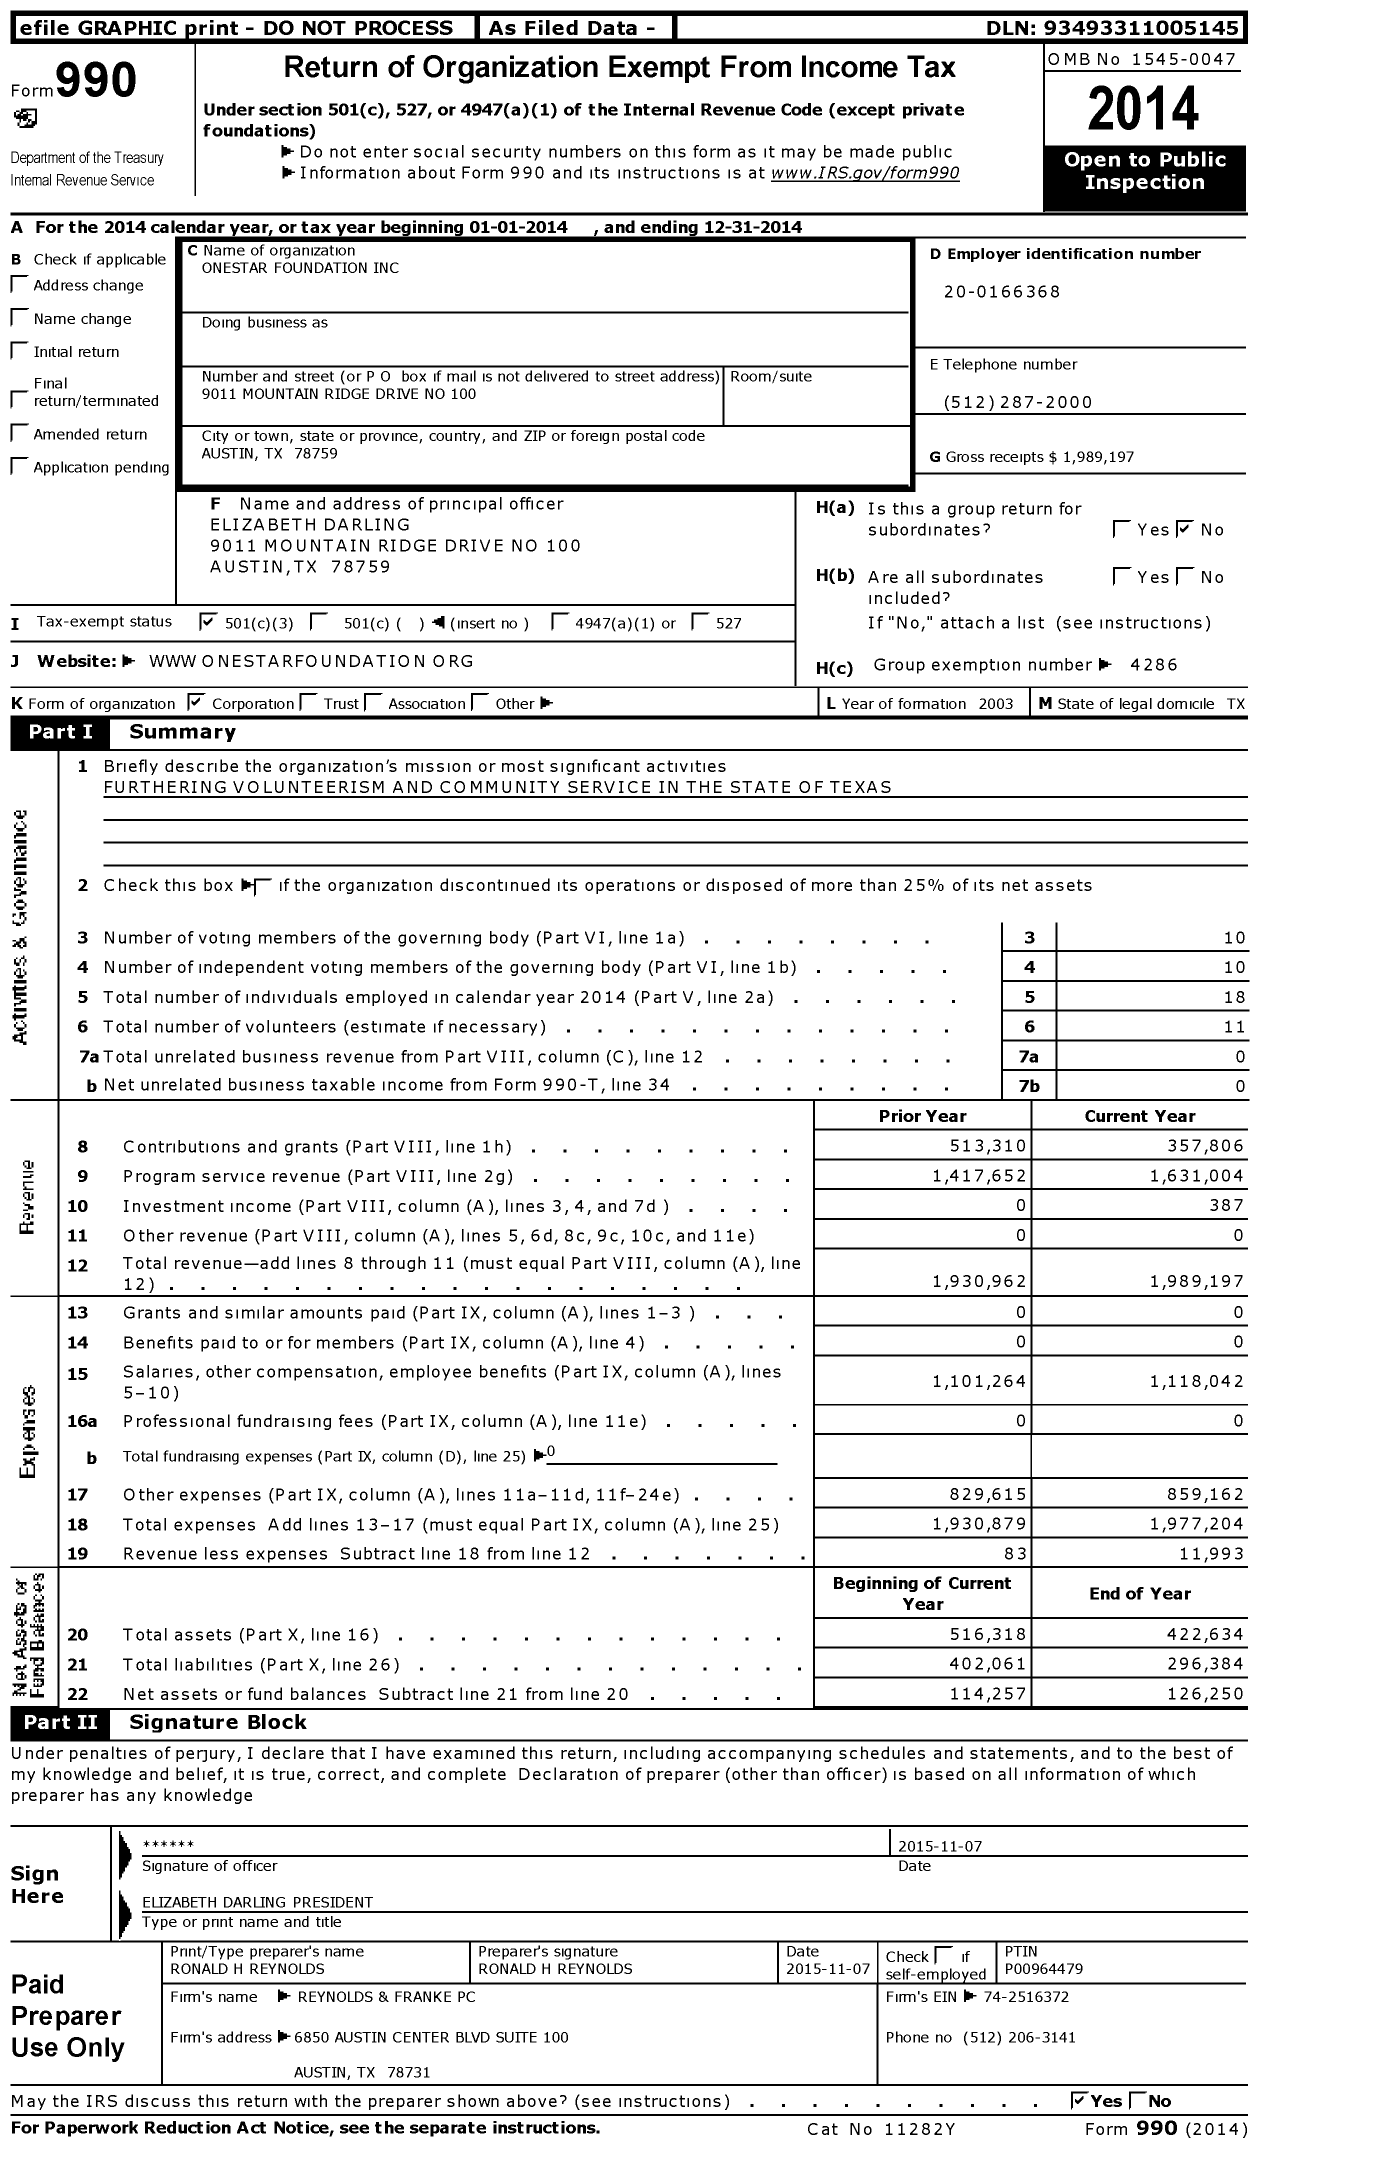 Image of first page of 2014 Form 990 for The Onestar Foundation